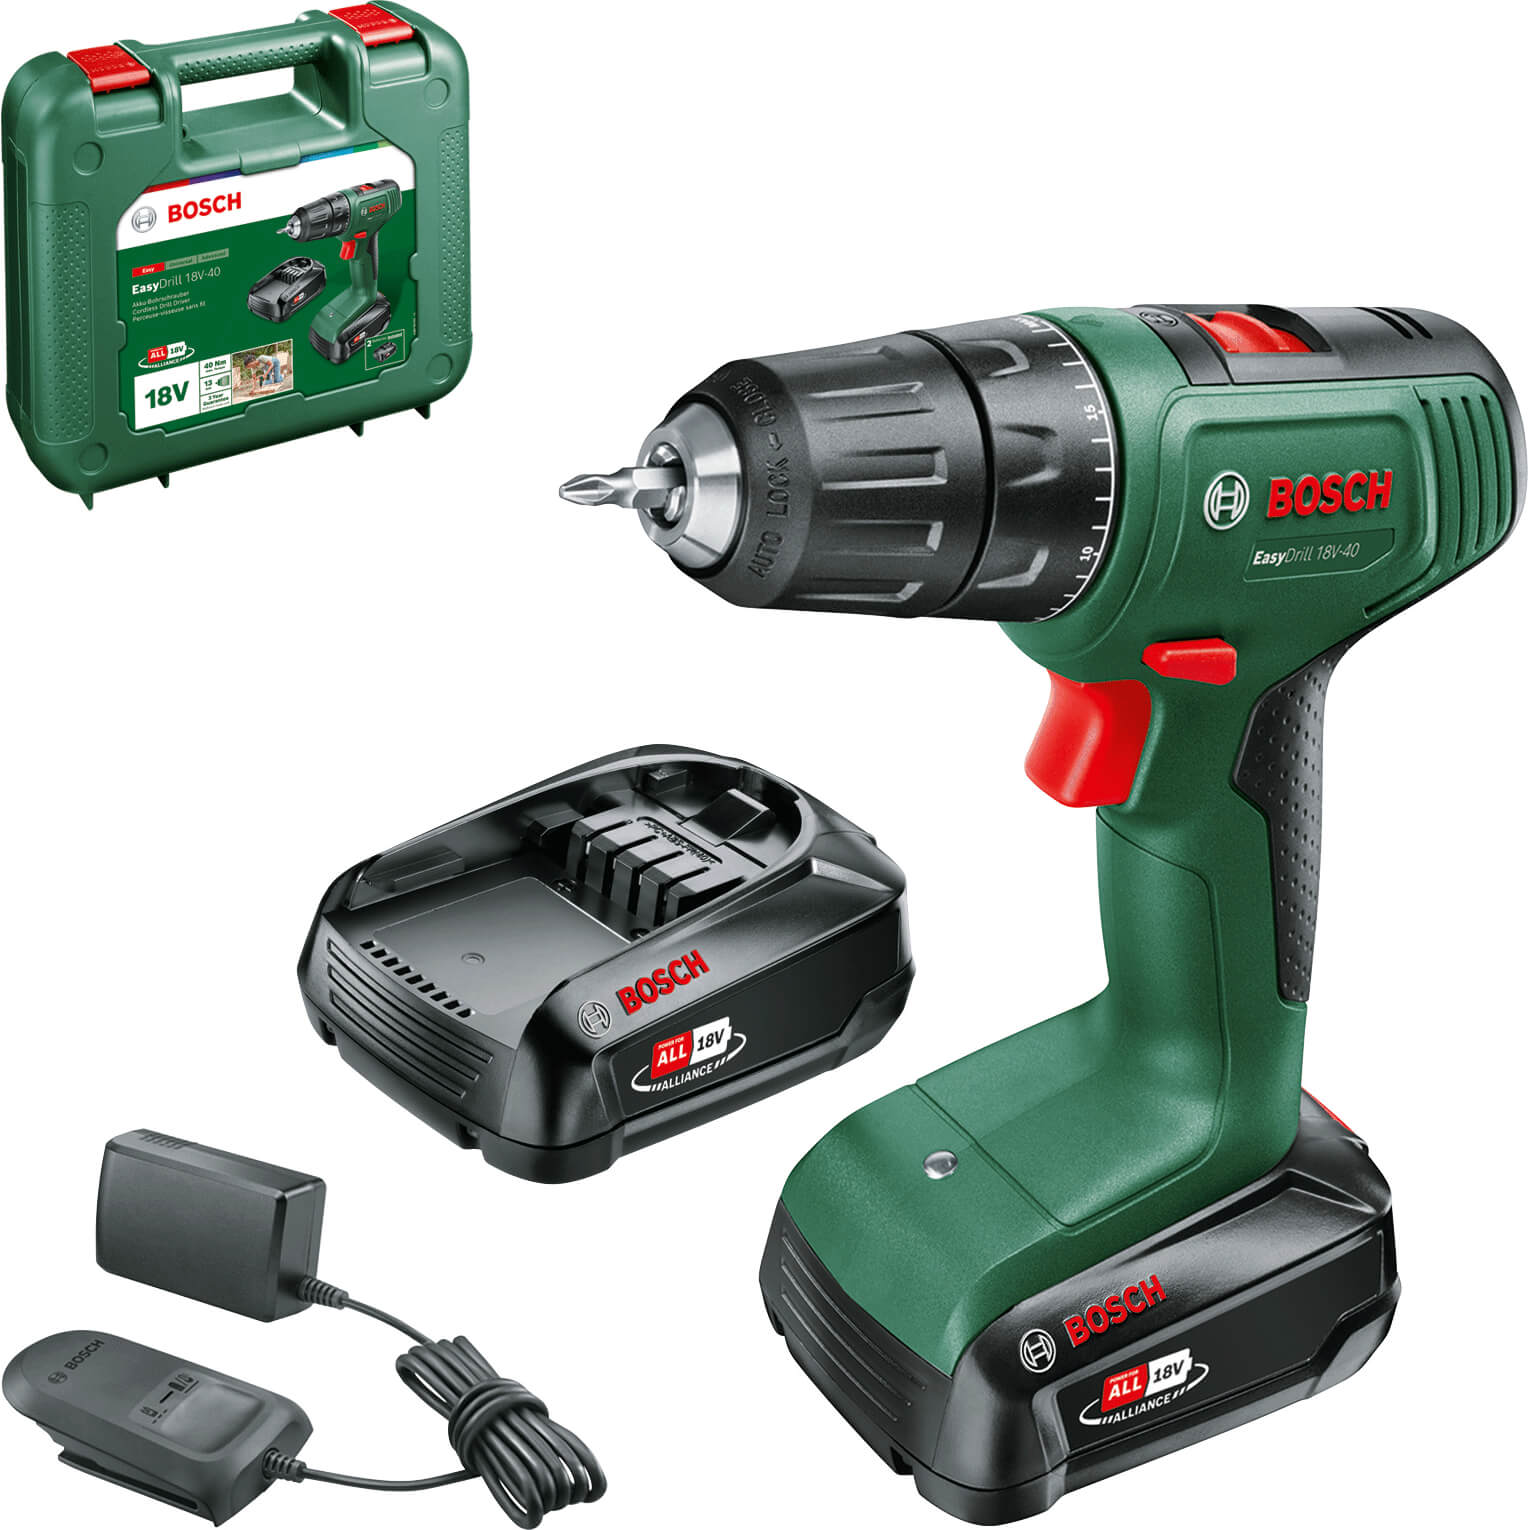 Image of Bosch EASYDRILL 18V-40 18v Cordless Drill Driver 2 x 1.5ah Li-ion Charger Case